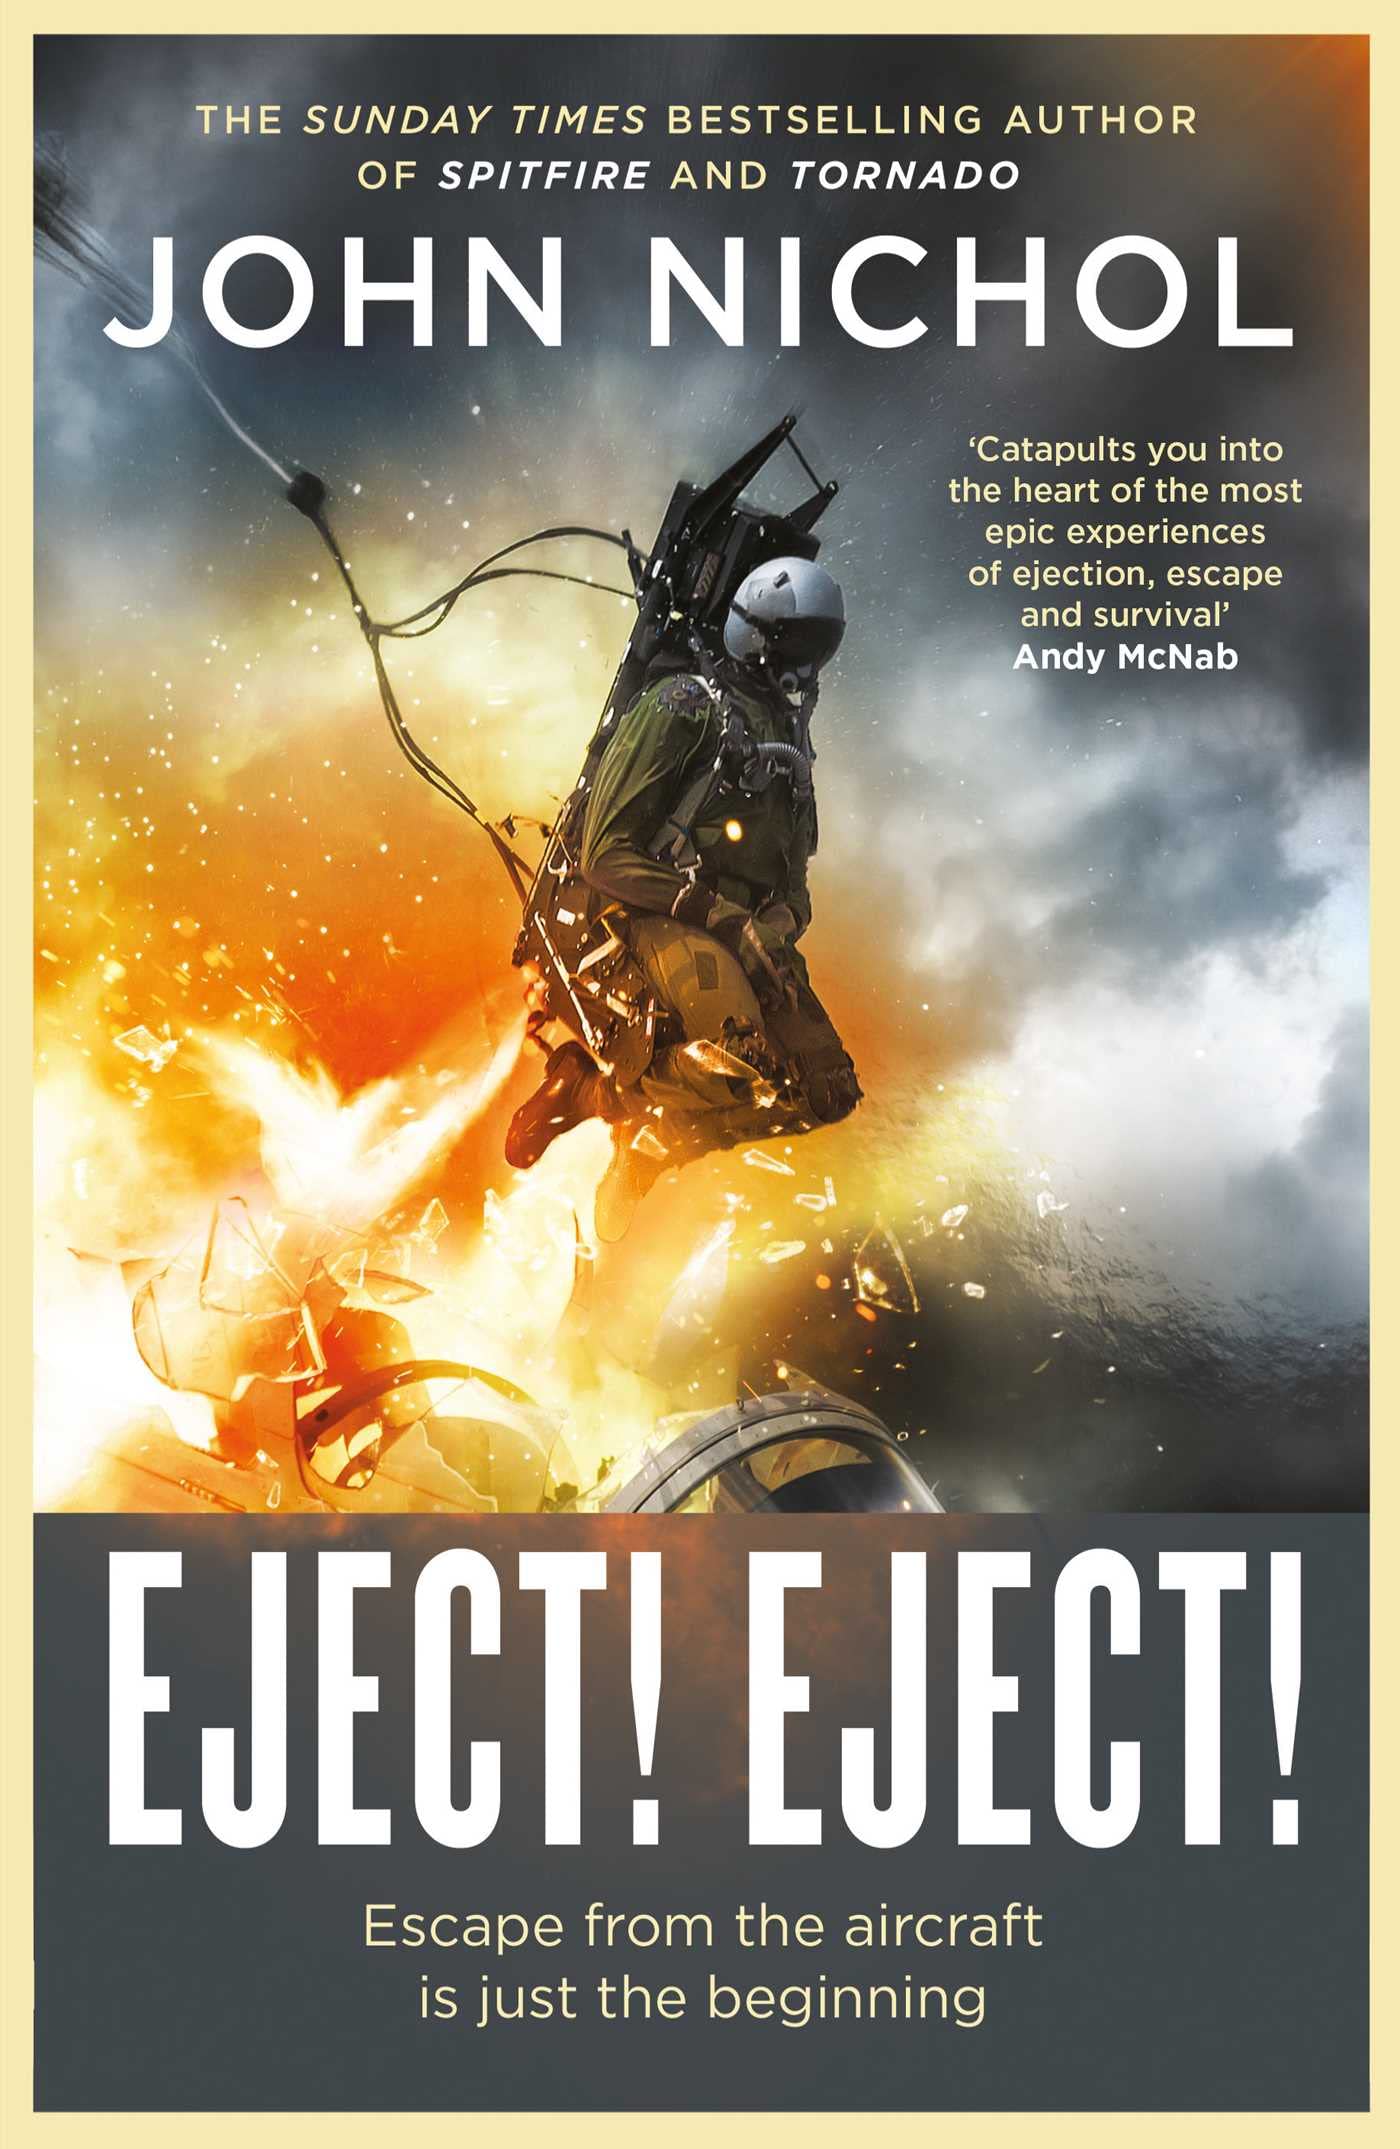 Eject eject book cover